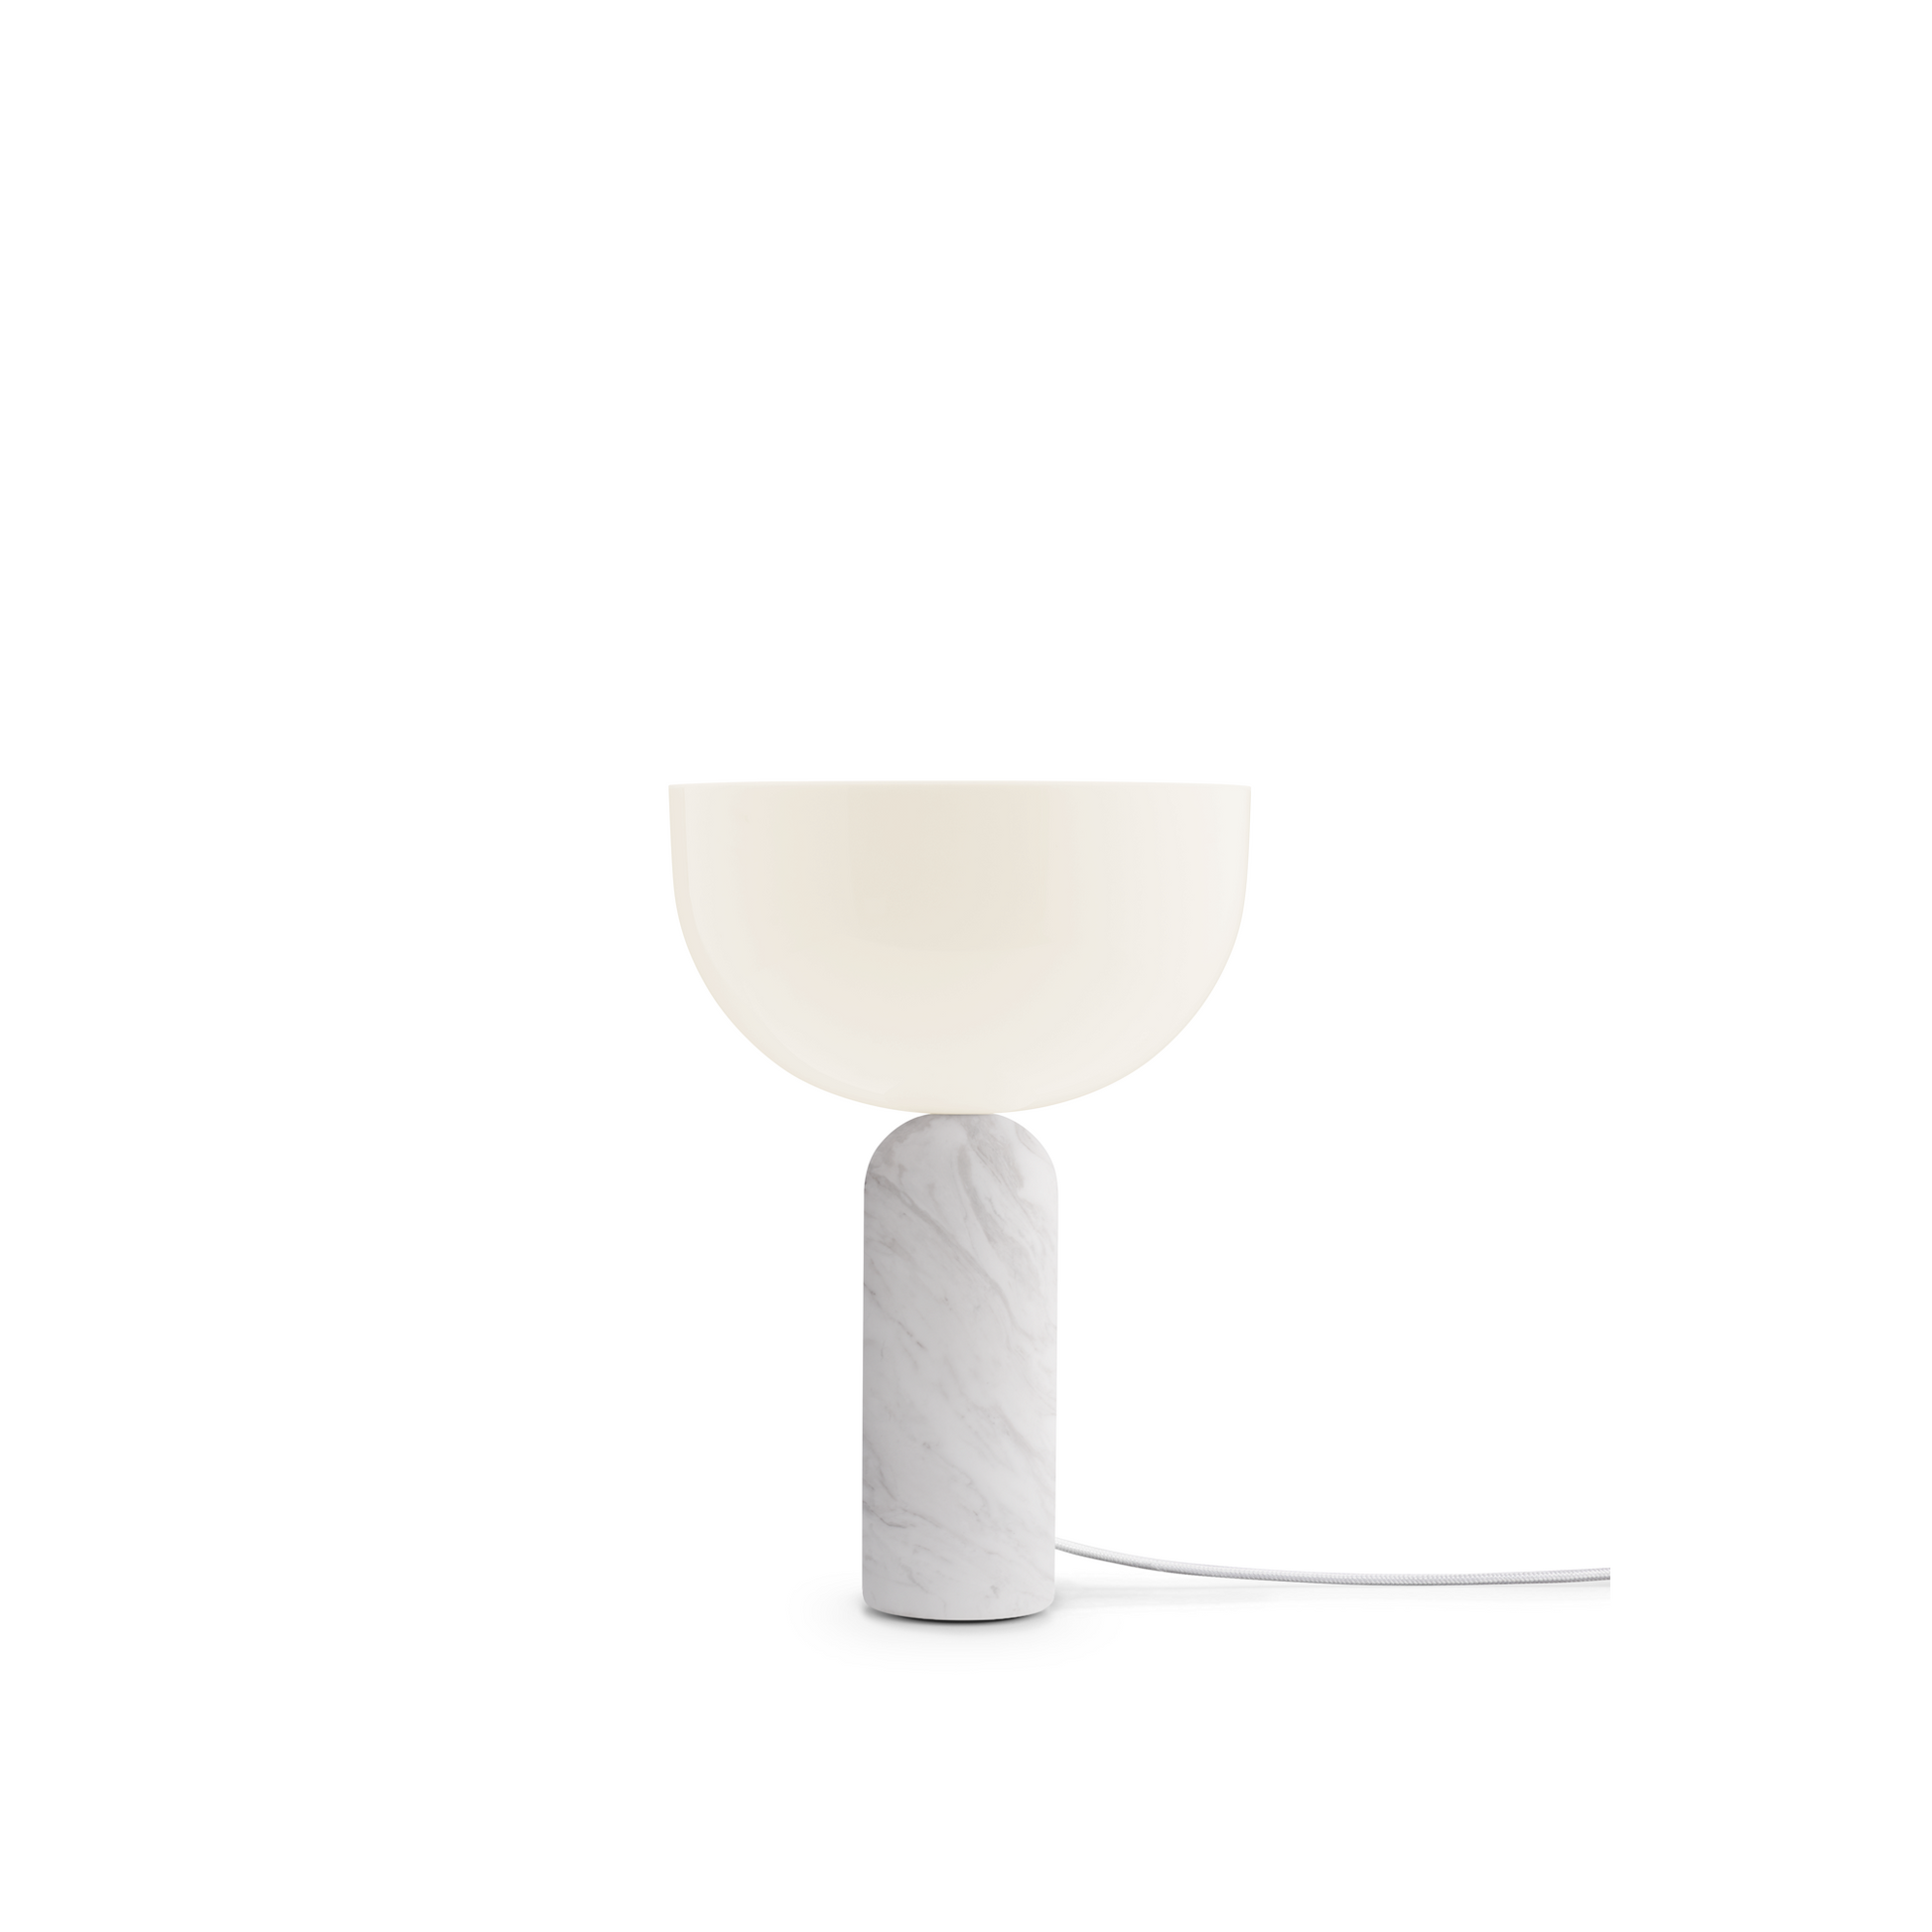 Kizu Table Lamp Small by NEW WORKS #White Marble